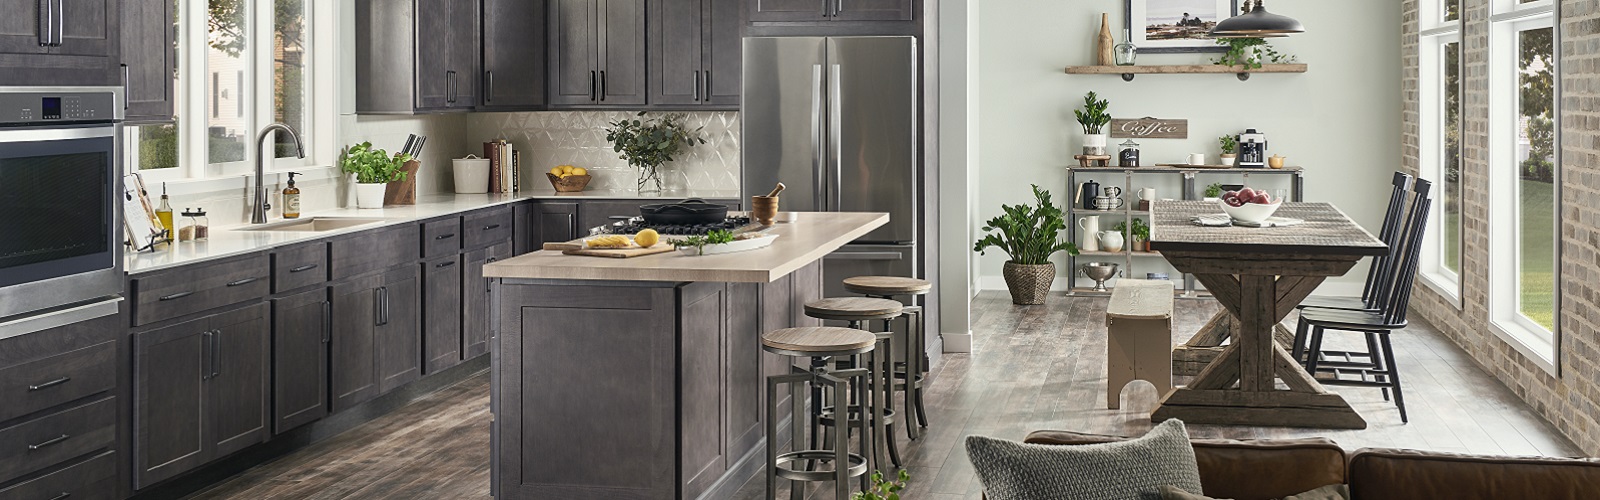 Four Reasons Kitchen Islands are a Must - Home Builders Supply